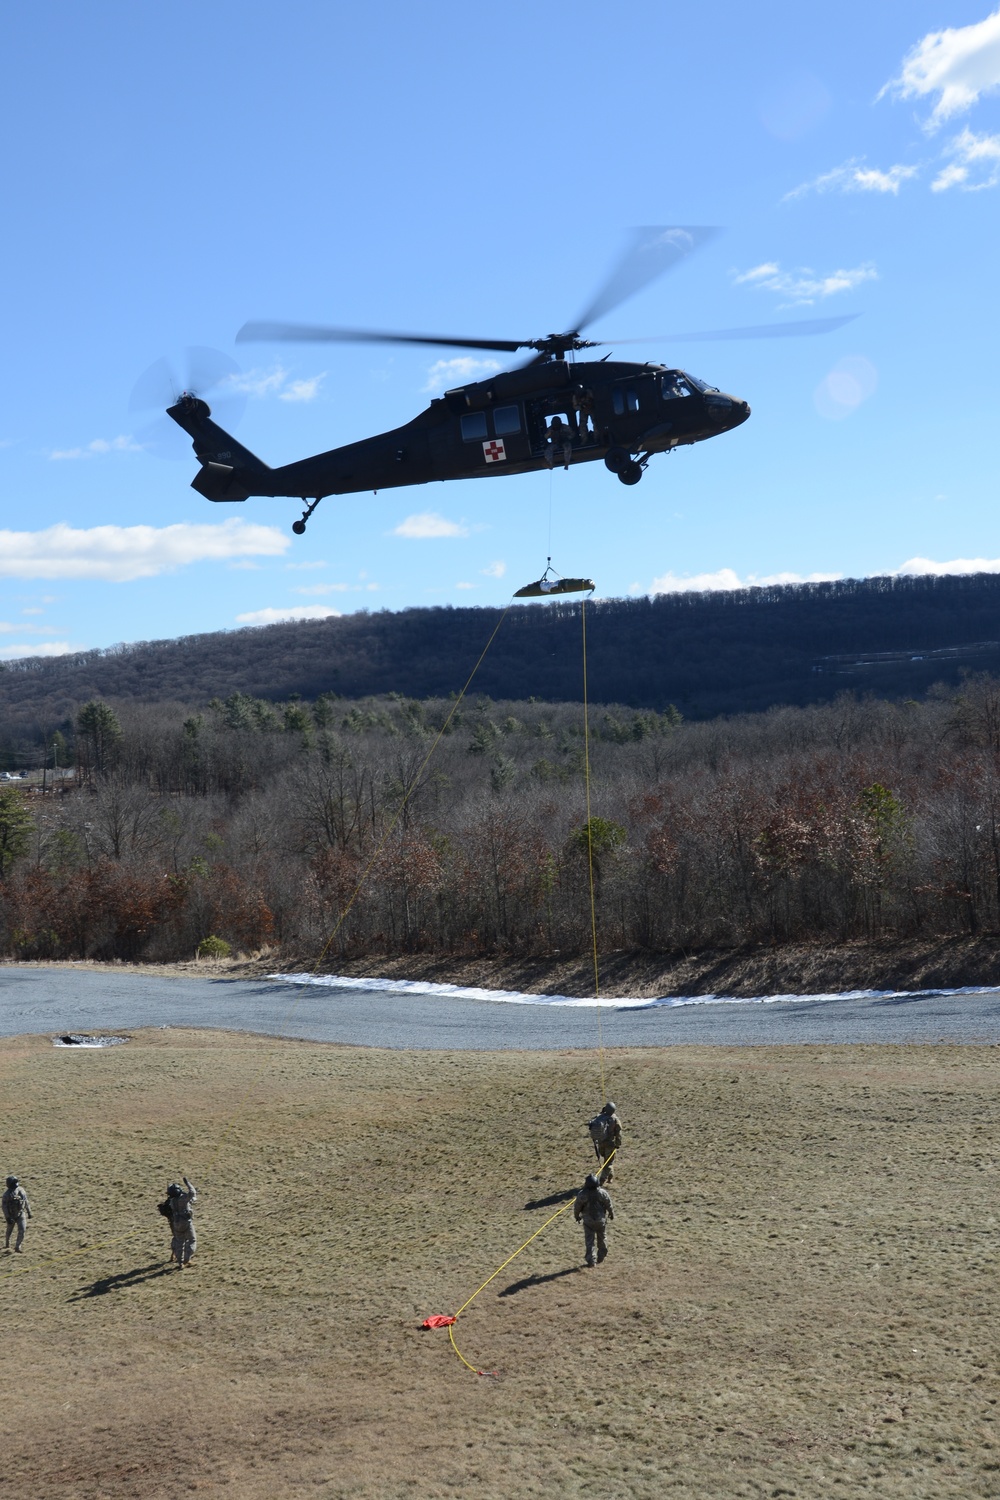 Pa. National Guard's Medical Battalion Training Site offers ‘phenomenal’ training